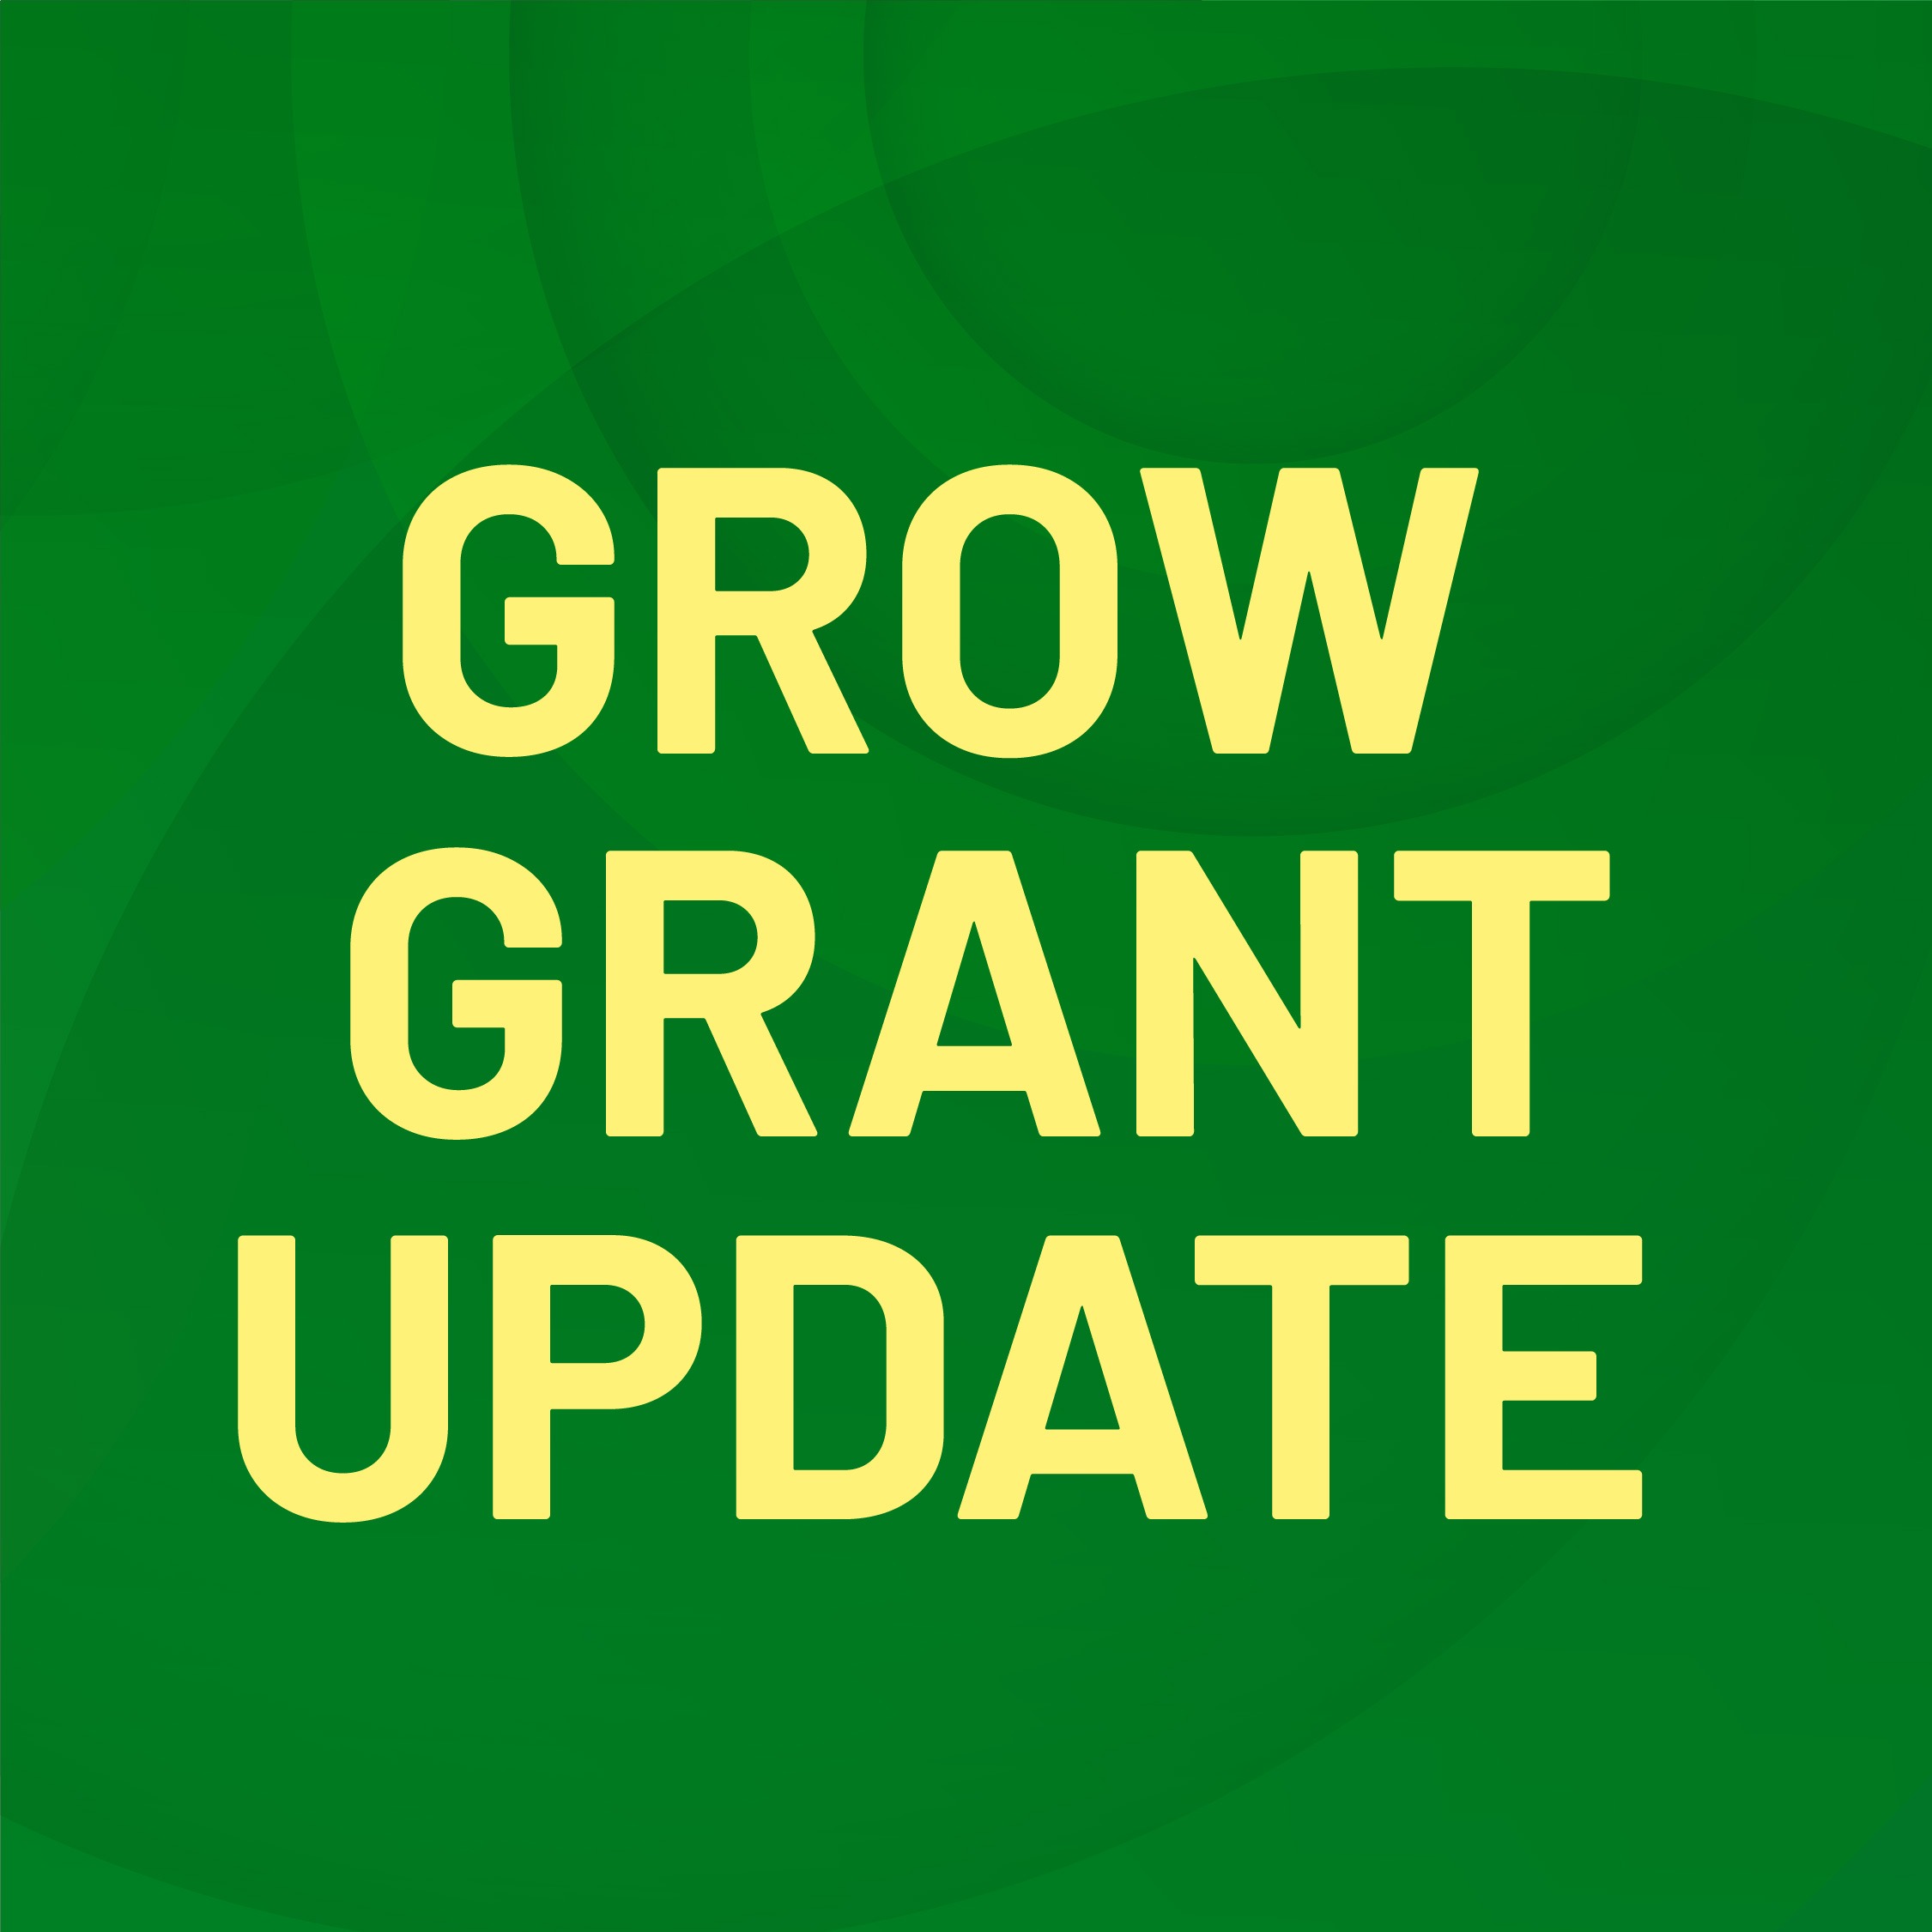 Important Grow Grant Update